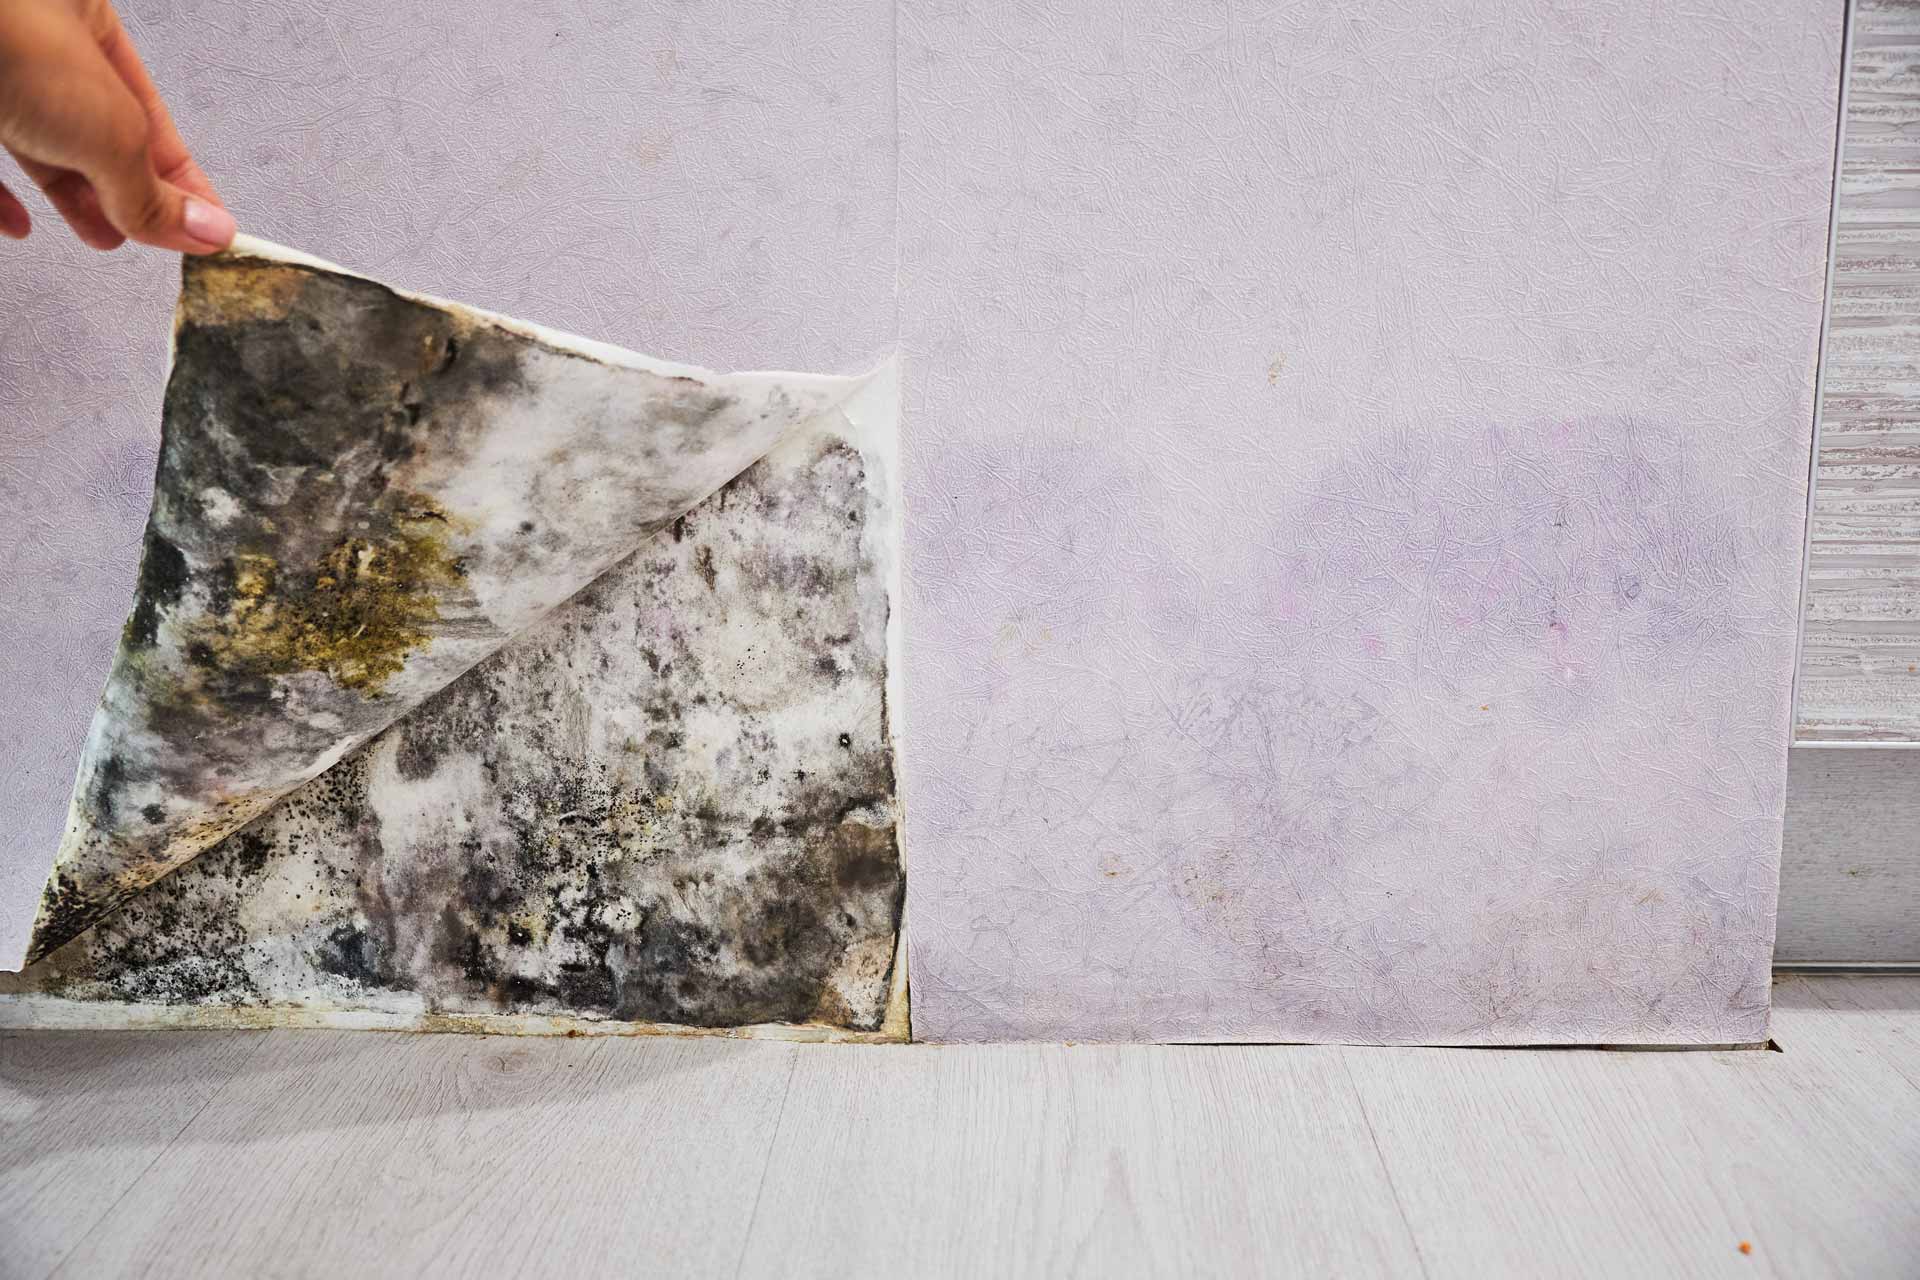 Hand peeling up wallpaper to reveal mold underneath